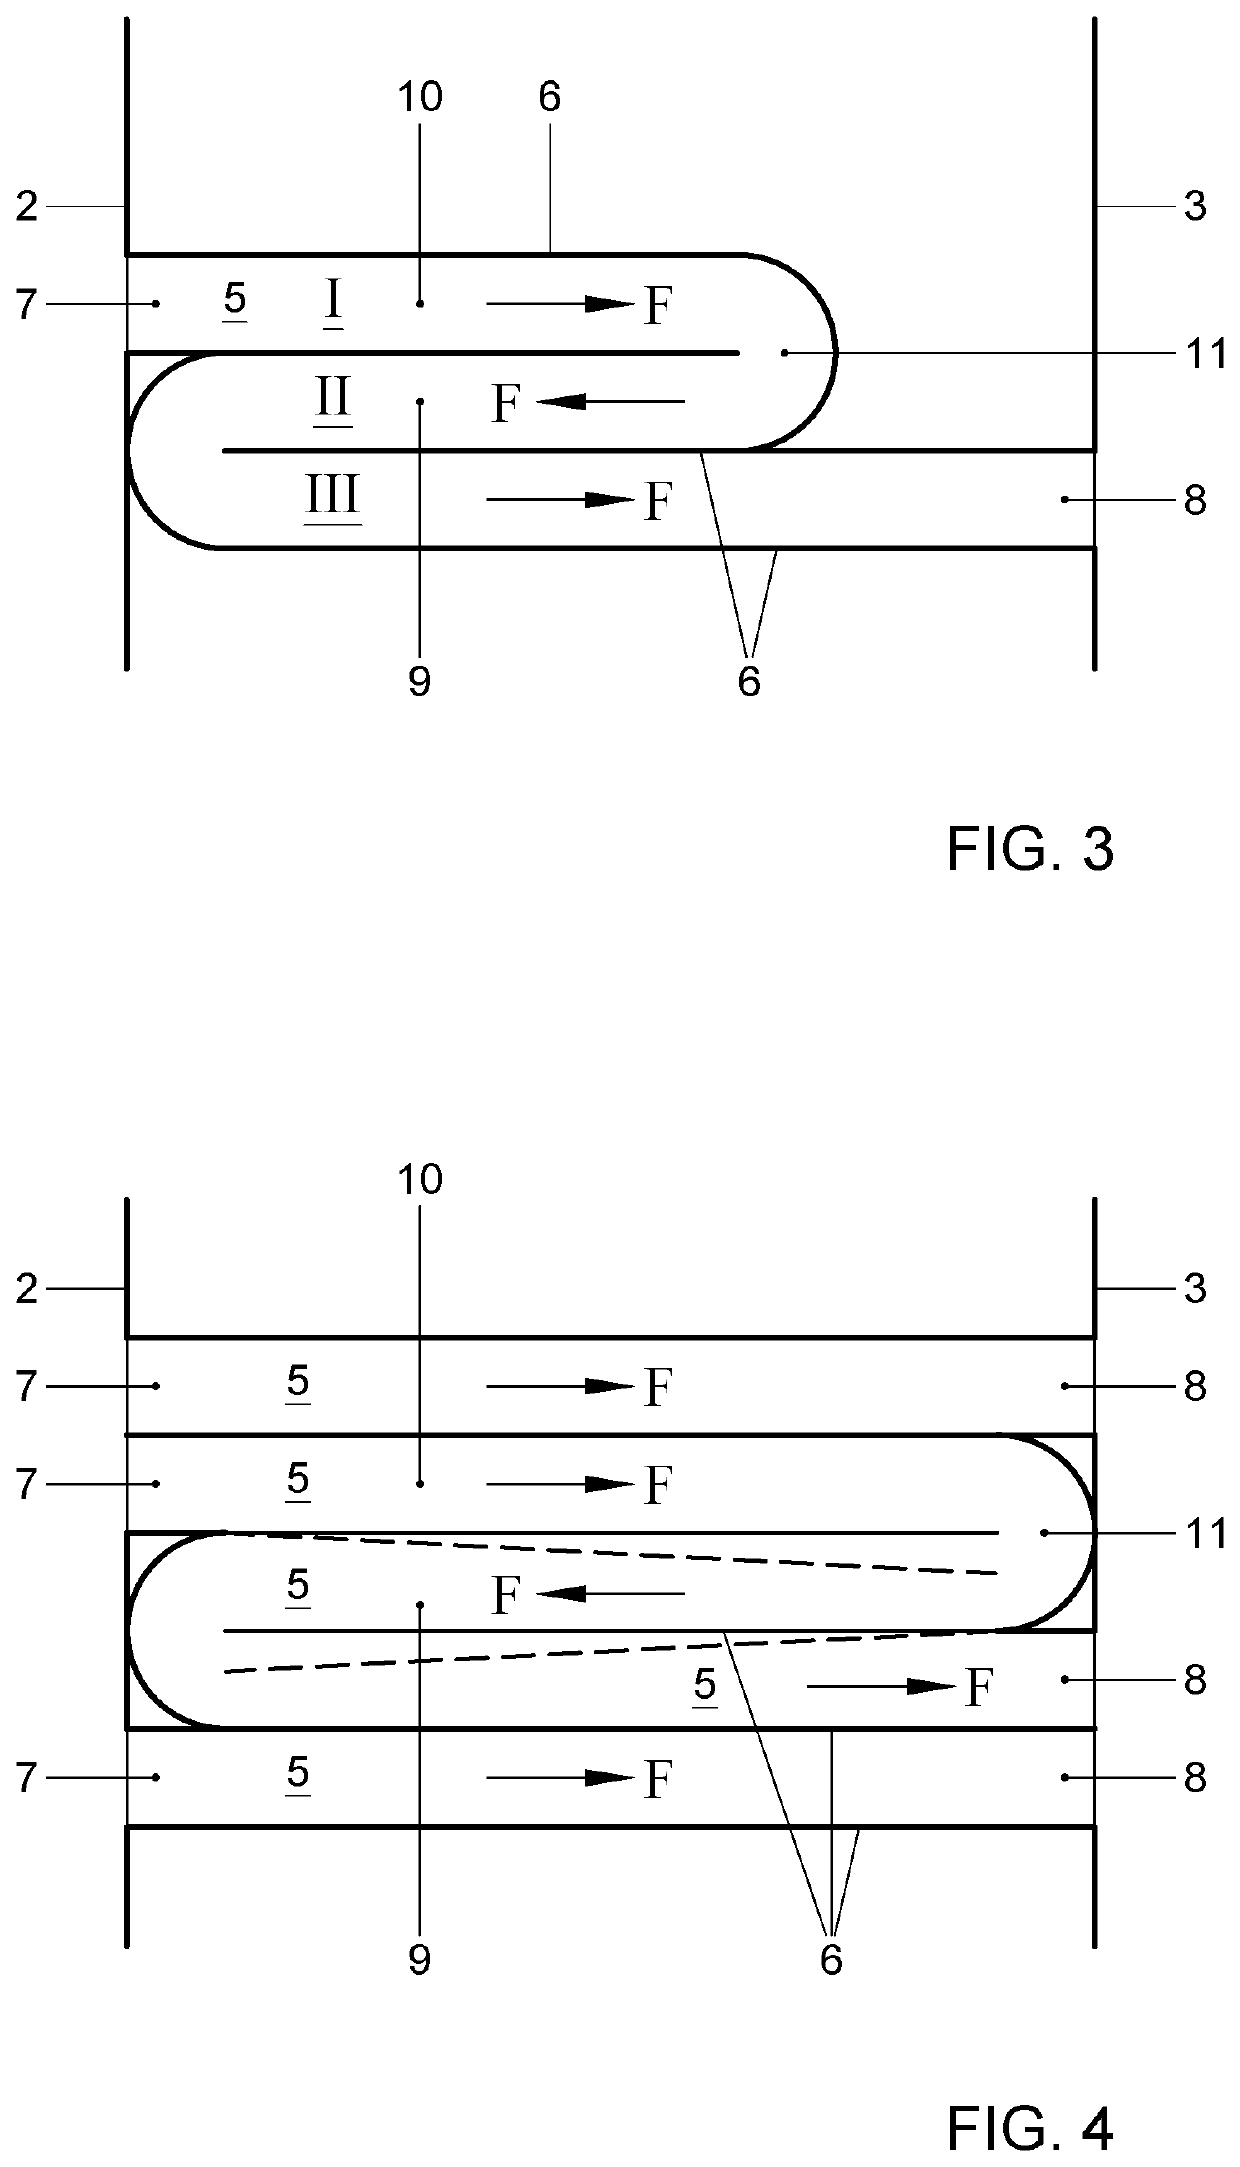 Propulsion element including a catalyzing reactor